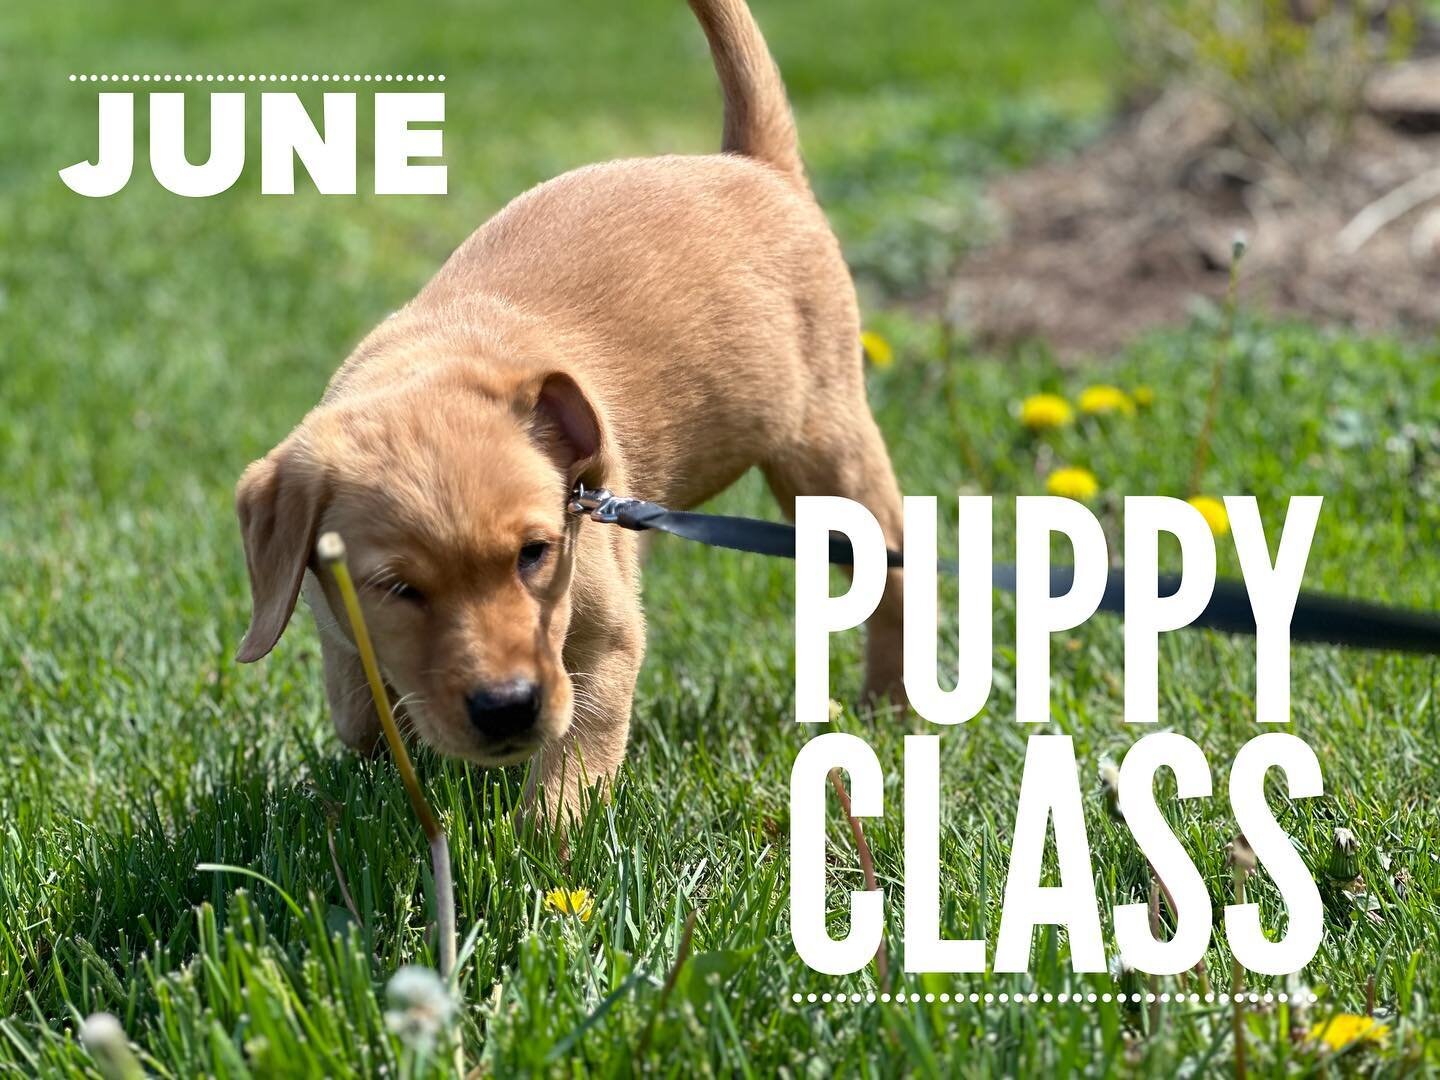 Contact us about our all new Puppy Class starting in June! 

Email - leadyourk9@gmail.com